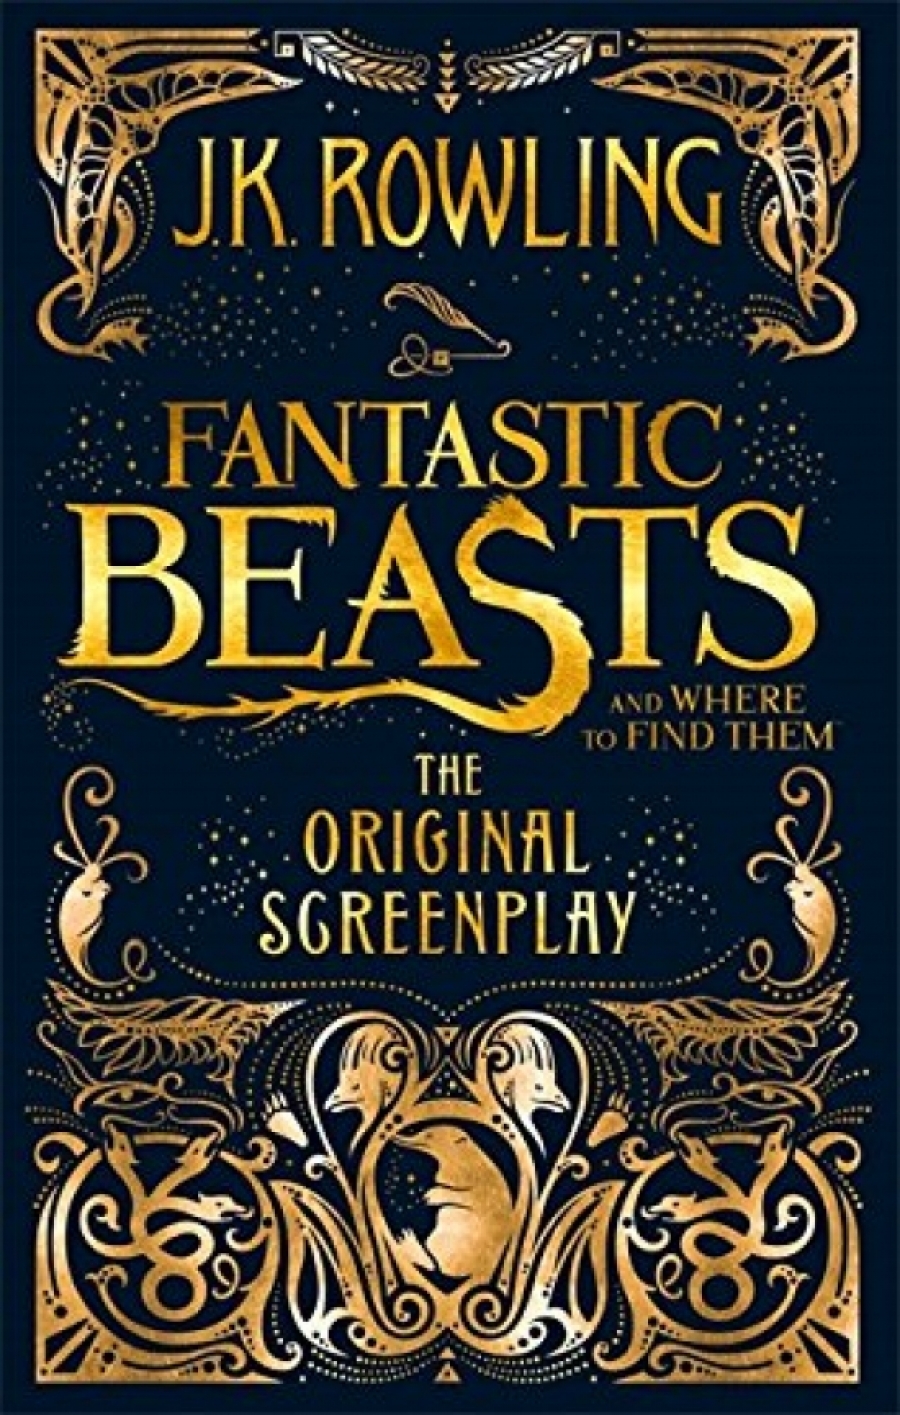 Rowling J.K. Fantastic beasts and where to find them 